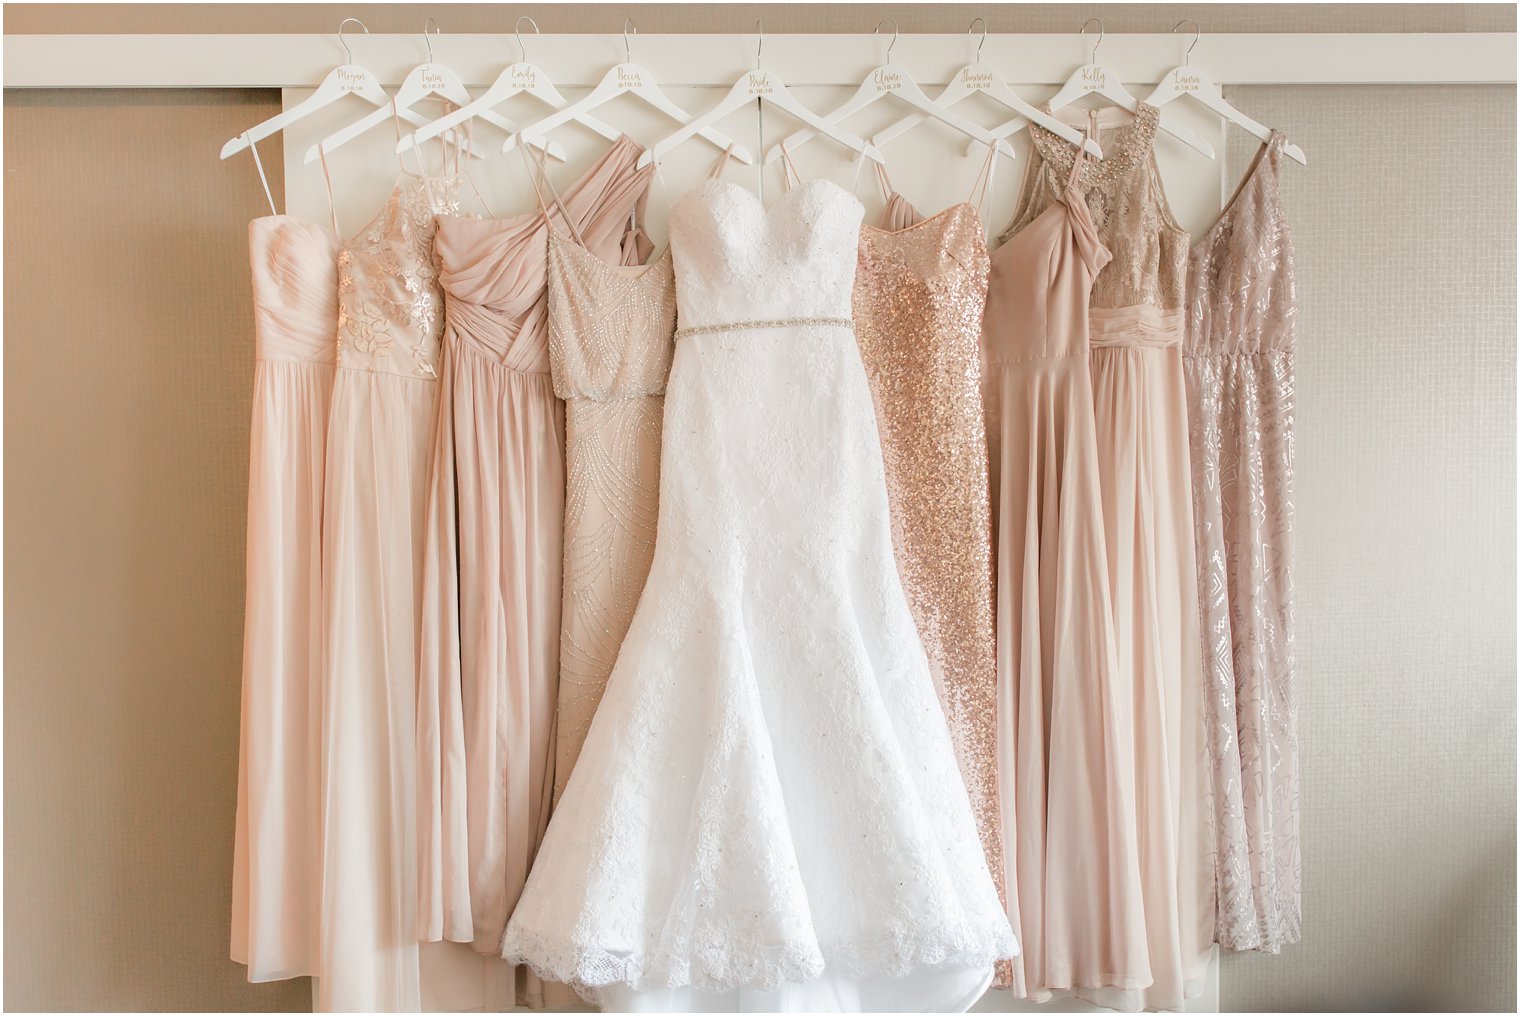 rose gold bridesmaid dresses by Adrianna Pappell, Dessy, Amsale and Watters